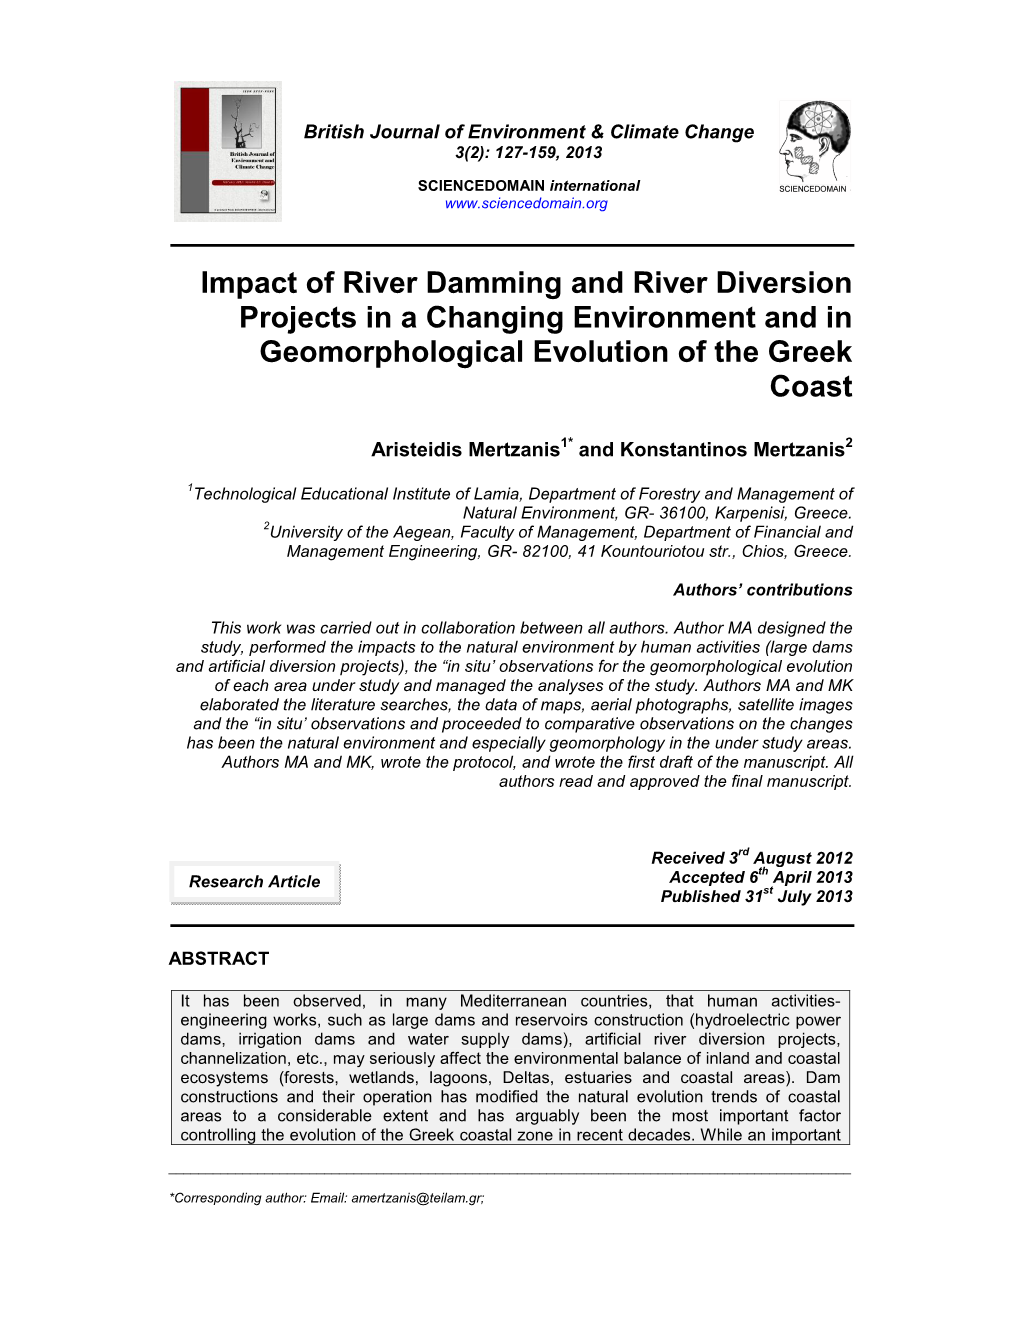 Impact of River Damming and River Diversion Projects in a Changing Environment and in Geomorphological Evolution of the Greek Coast